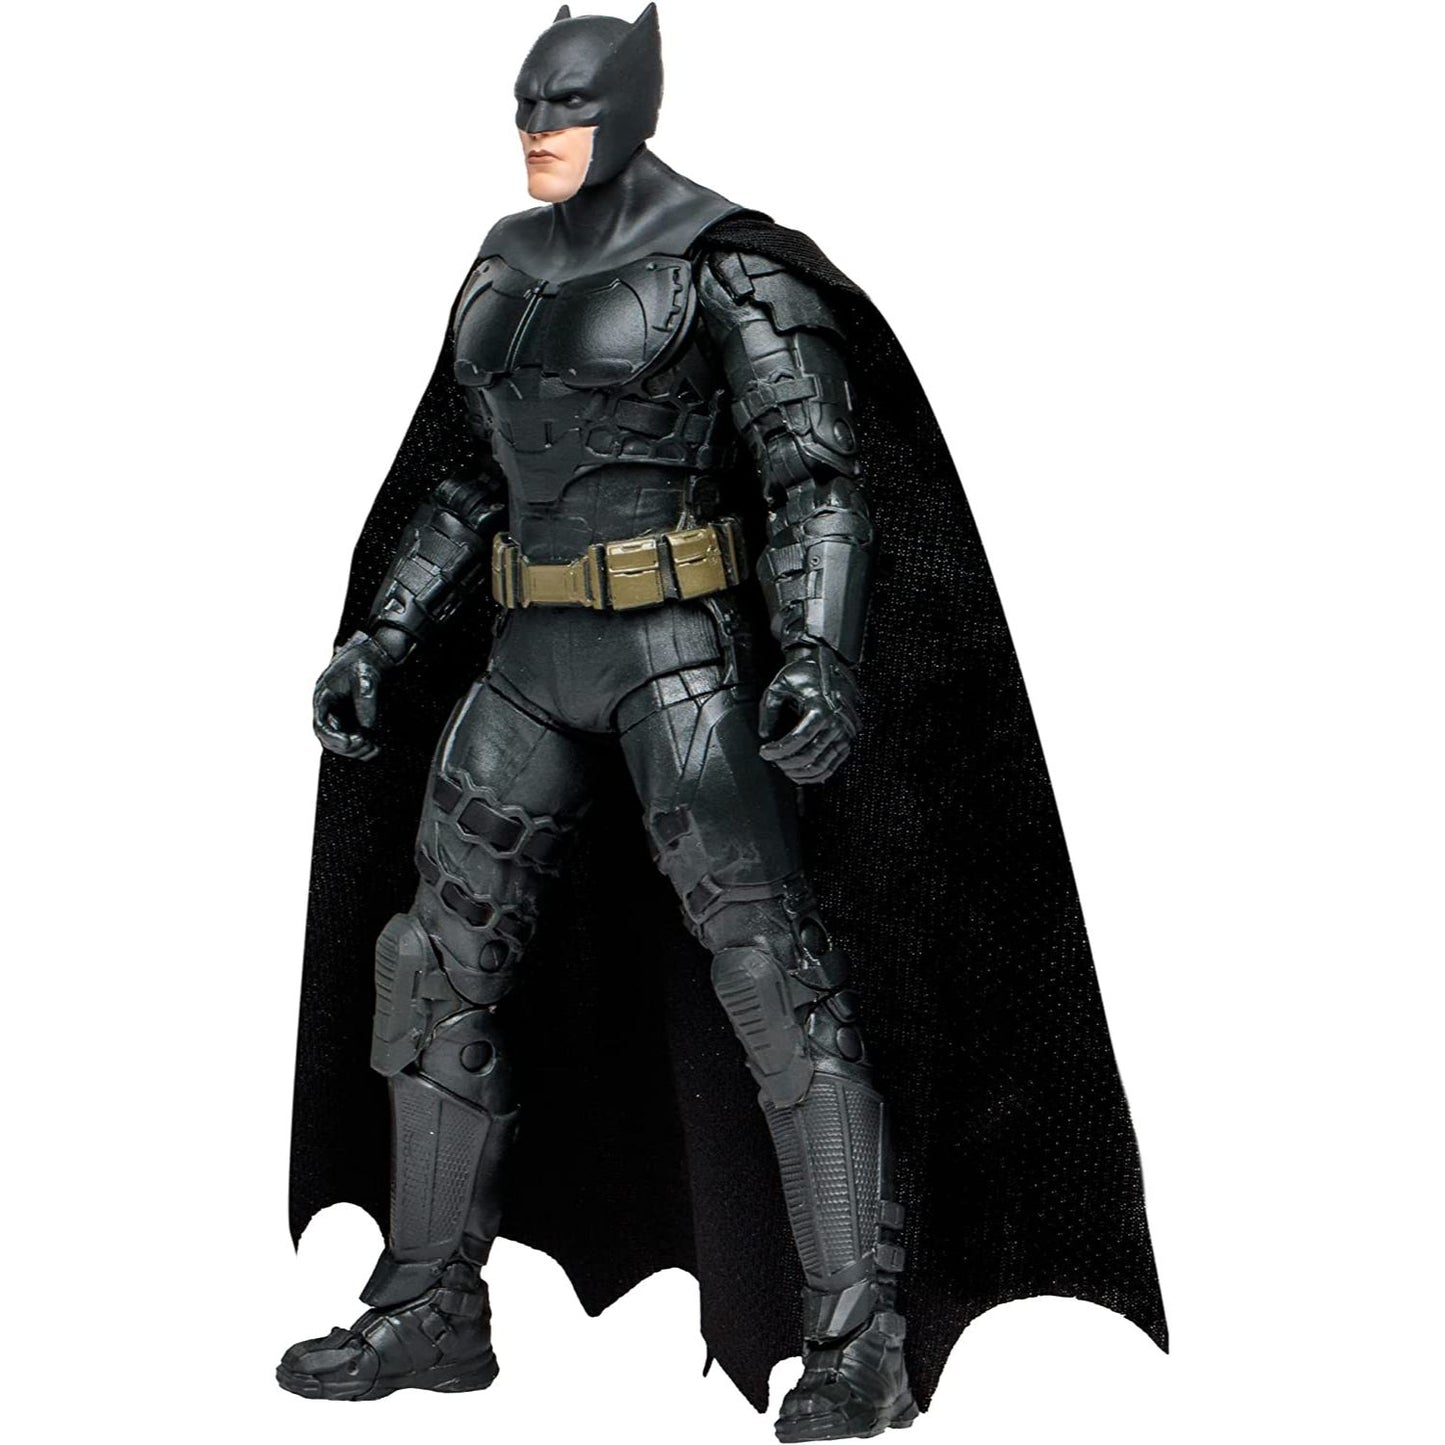 DC Multiverse - The Flash Movie - The Batman Action Figure Toy 7-INCH side pose - Heretoserveyou